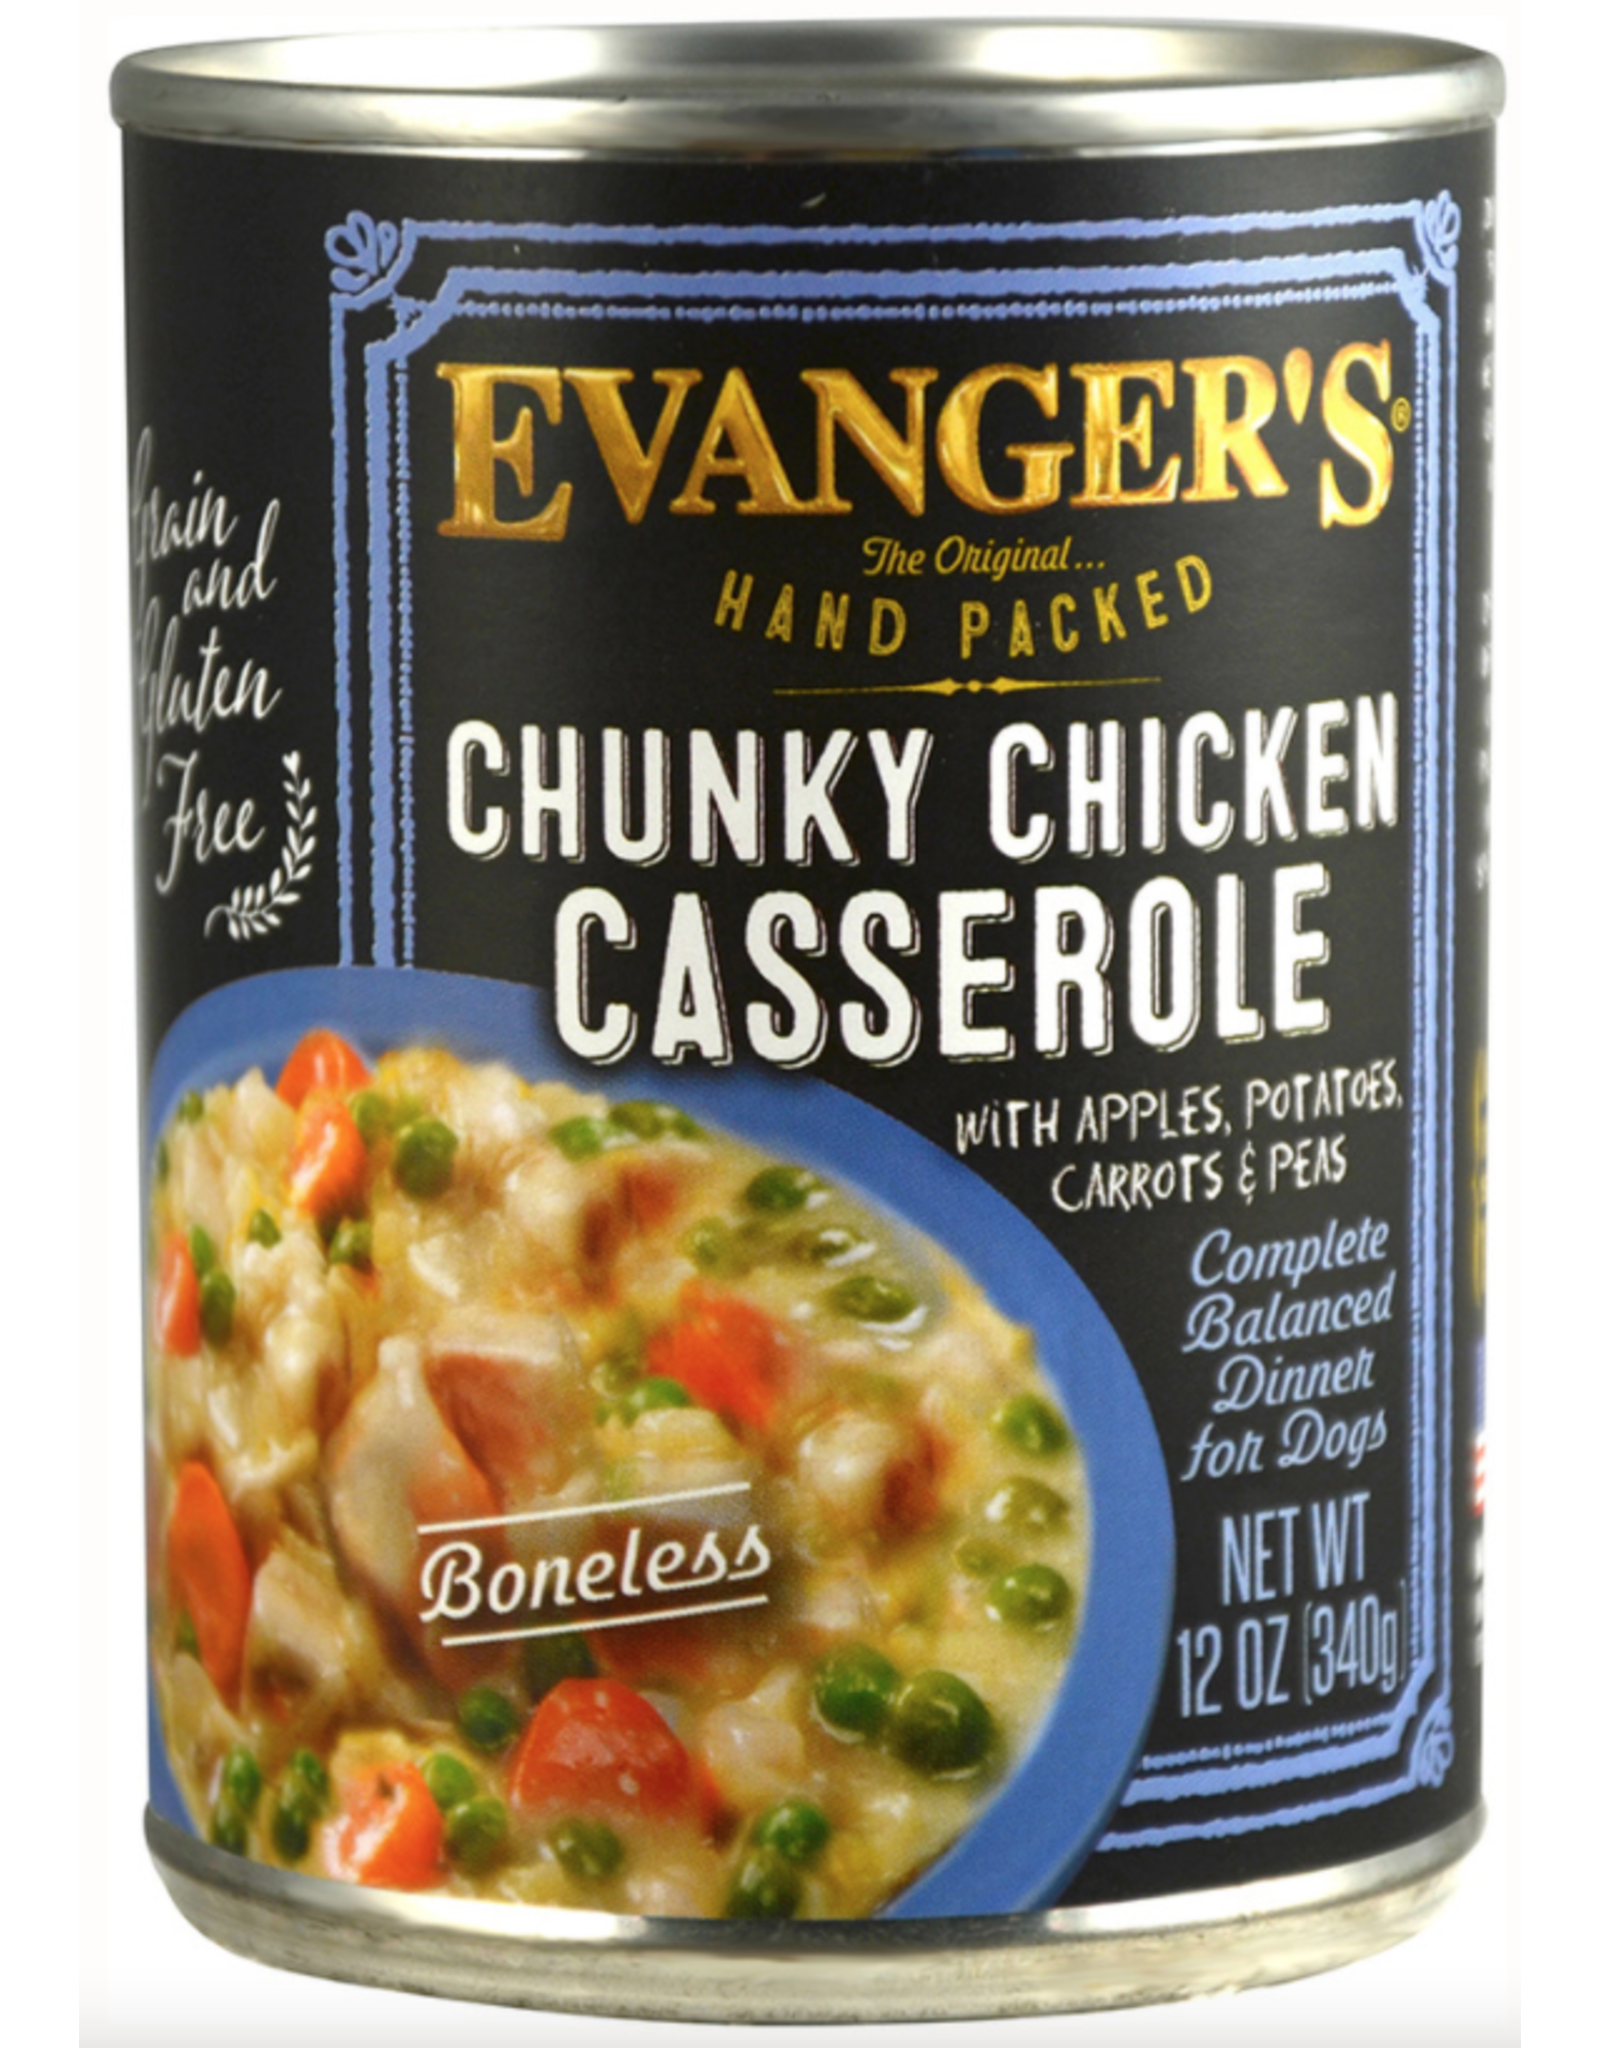 Evangers Evanger's Hand Packed Chunky Chicken Casserole Dog Food 12oz